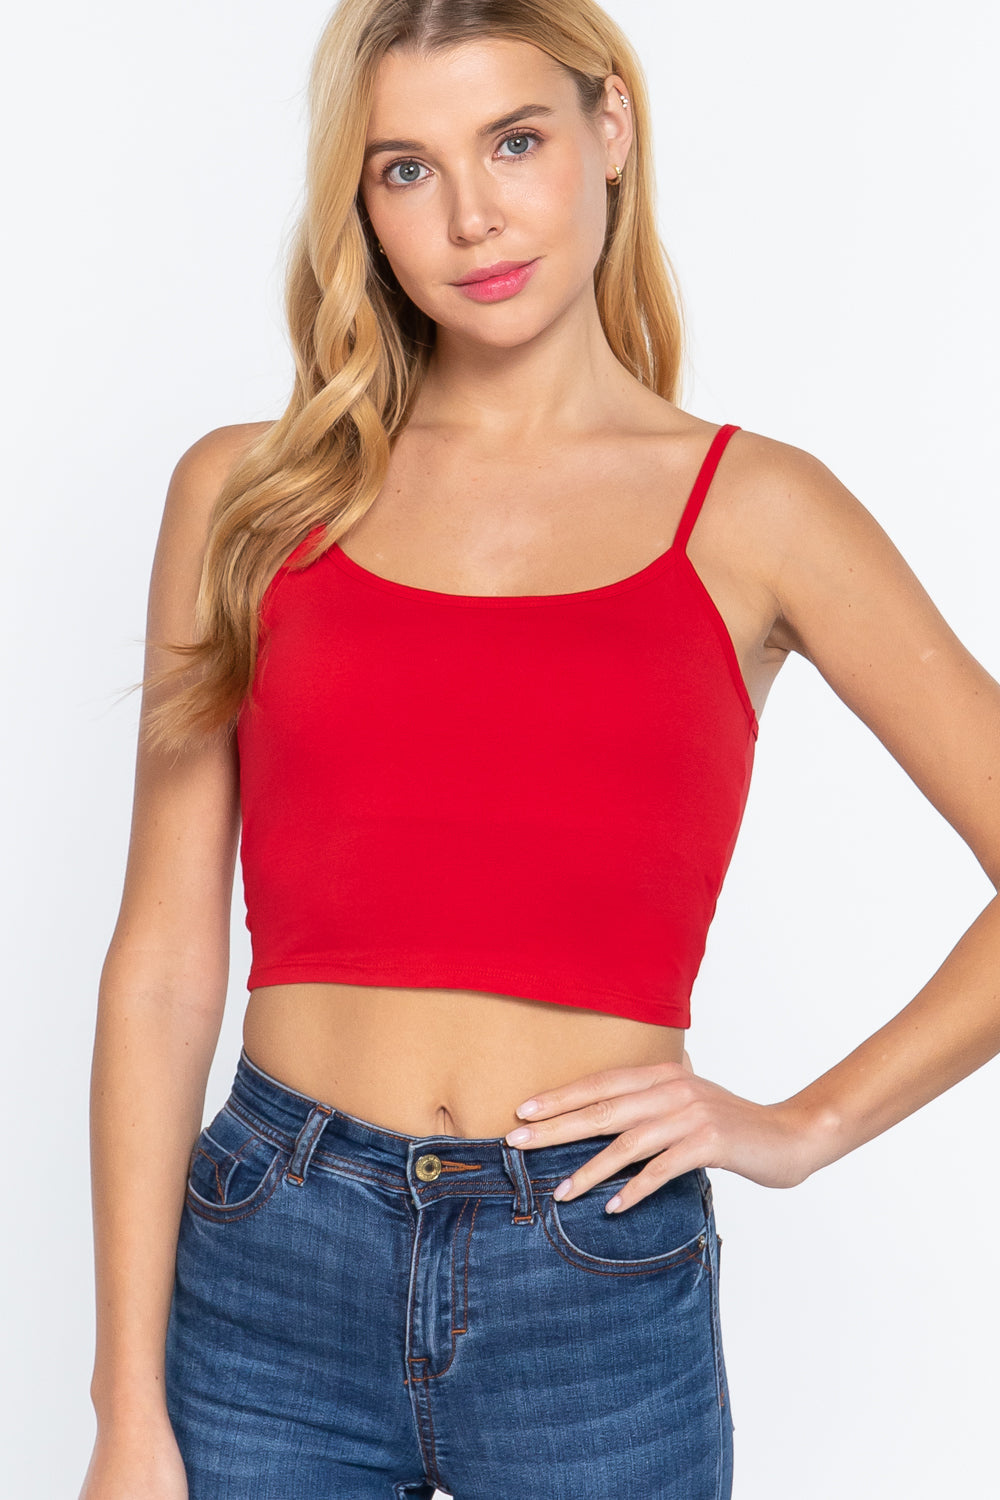 The802Gypsy  shirts and tops ❤GYPSY LOVE-W/removable Bra Cup Cotton Spandex Bra Top